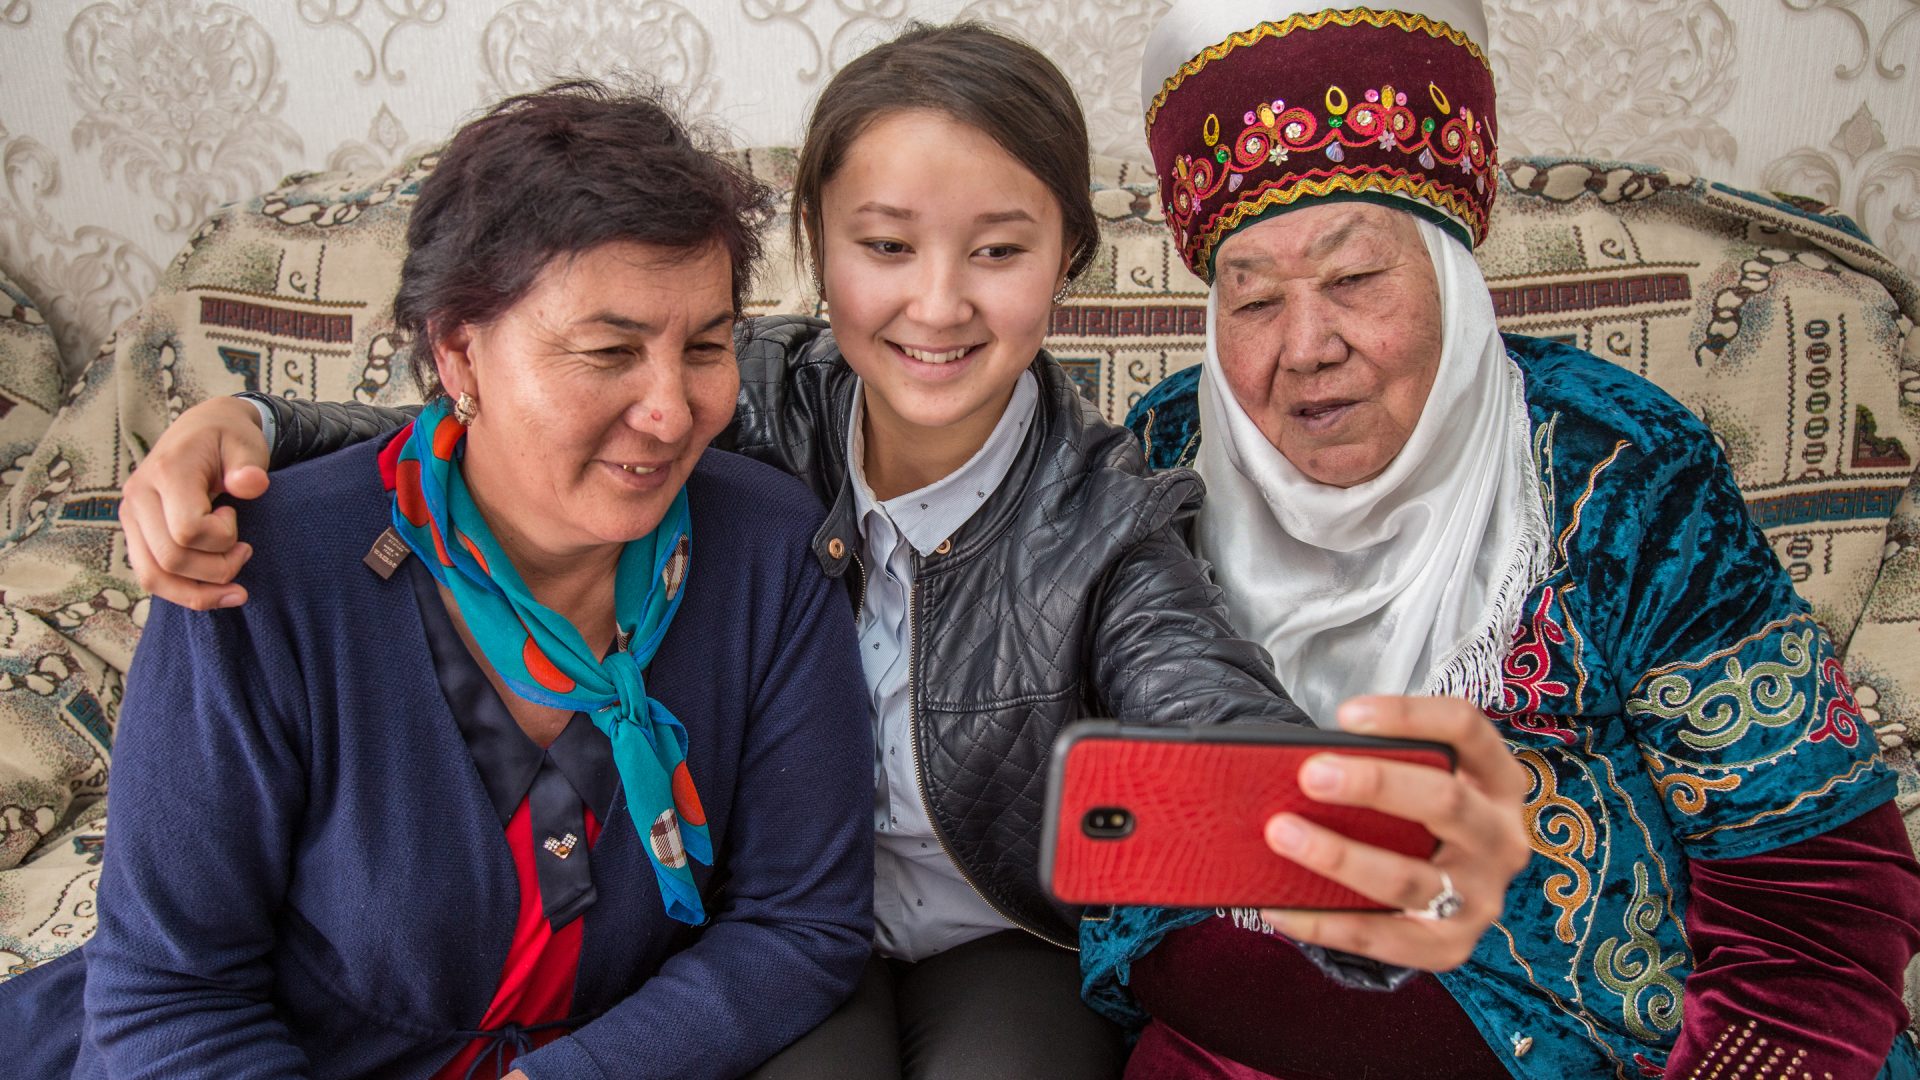 Older people in Central Asia